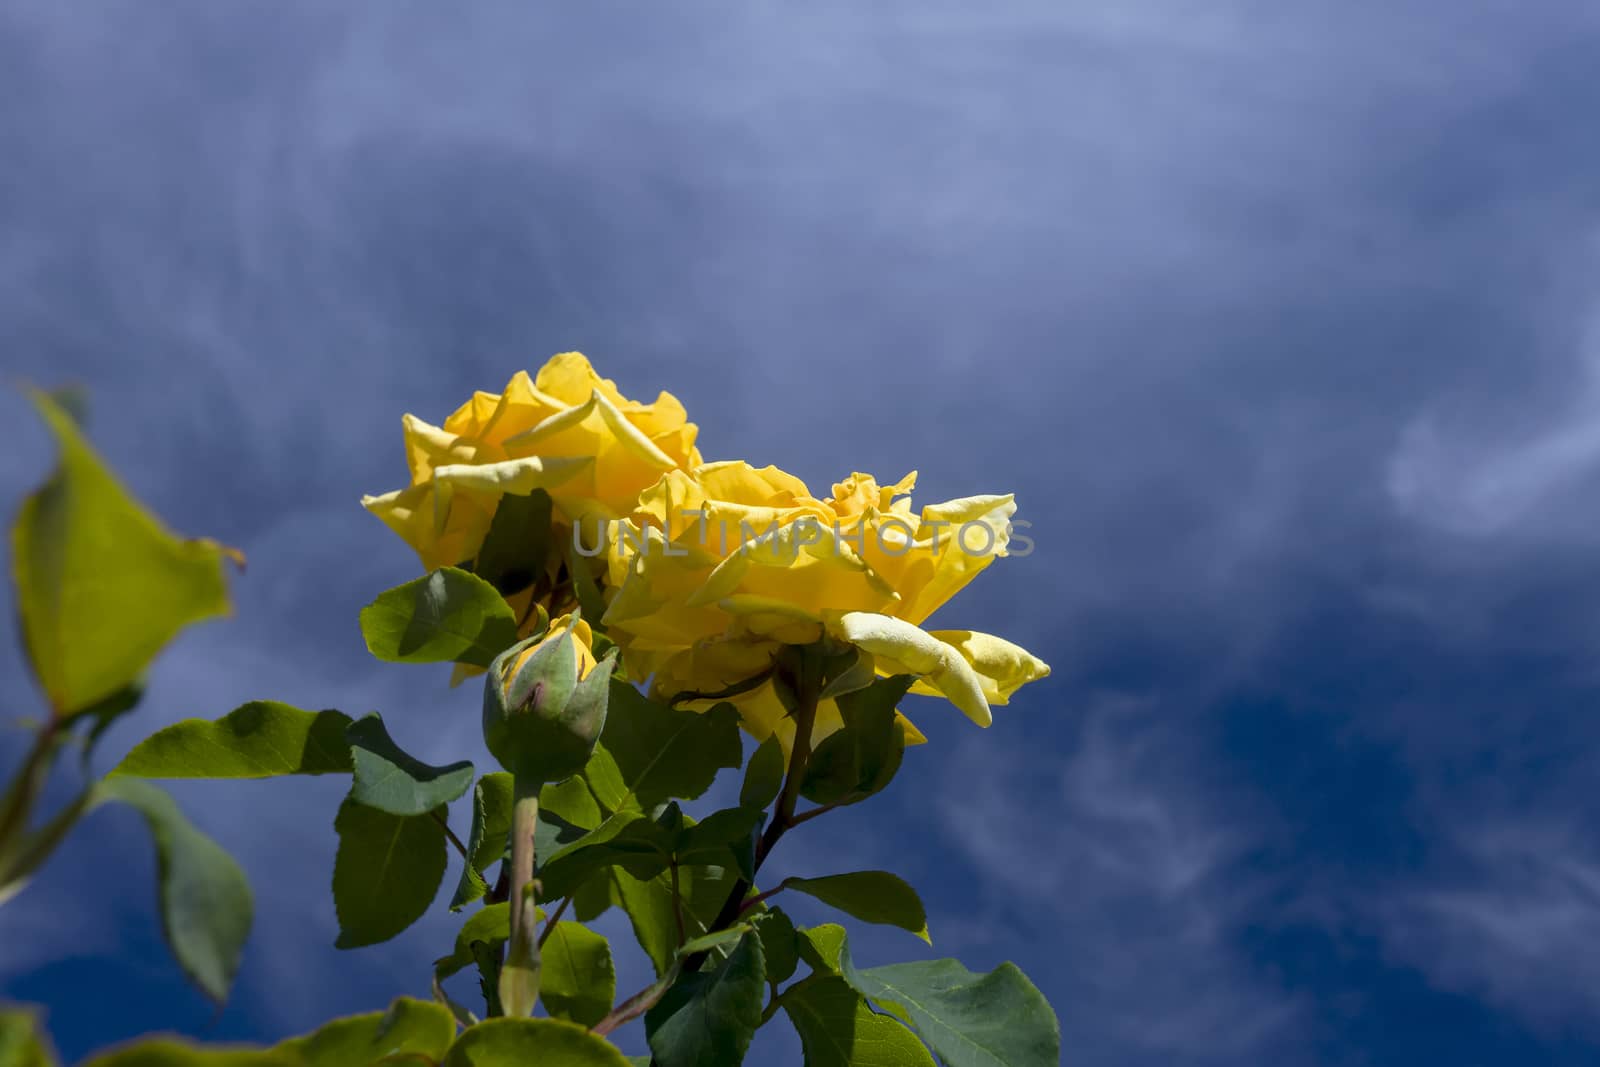 Yellow Roses and Clouds by mmarfell